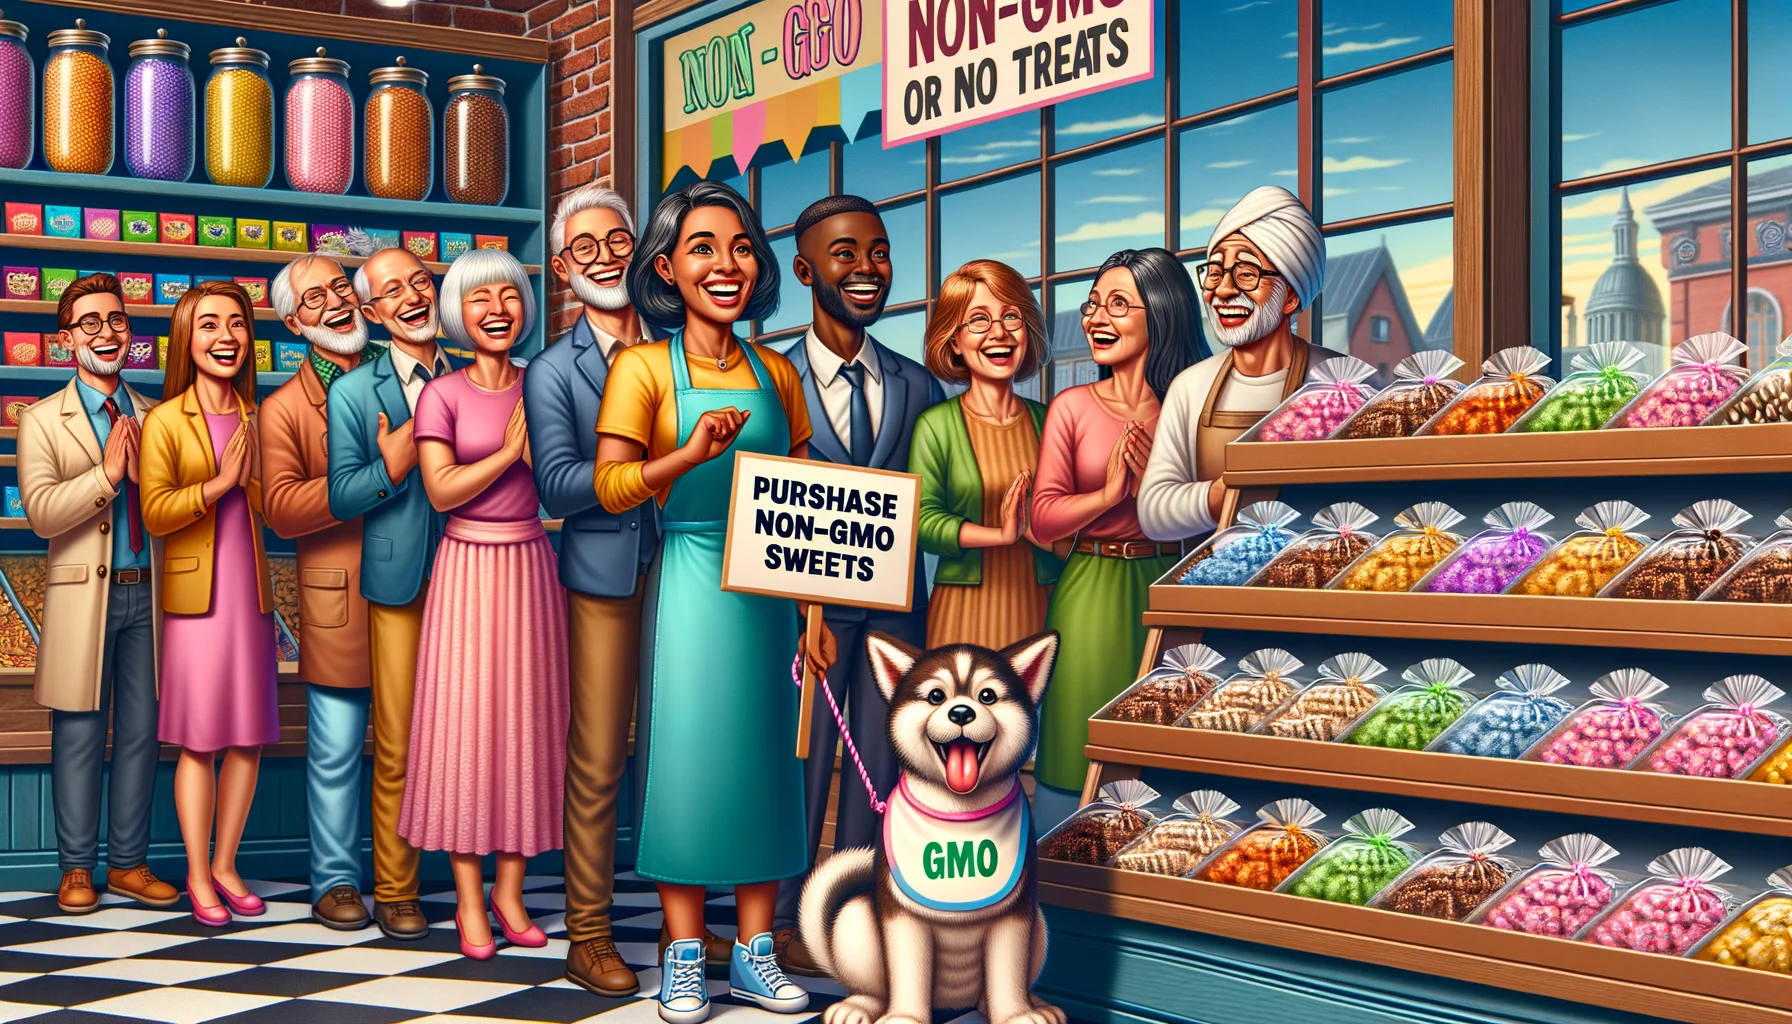 Create an amusing and lifelike image that promotes the purchase of non-GMO sweets. Picture this scenario: A candy store filled with eye-catching displays of colorful non-GMO sweets, beautifully packaged. A joyful South Asian woman is the shop owner, wearing a bright apron, smiling broadly as she holds a sign that says 'Purchase Non-GMO Sweets'. A line of different customers, including a tall Black male teenager, a short Hispanic female senior citizen, and a couple of Middle-Eastern descent, expressing delight at the sight of the sweets. They are laughing at the sight of a cute dog wearing a bib reading 'Non-GMO or no Treats', adding a light-hearted touch to the scene.